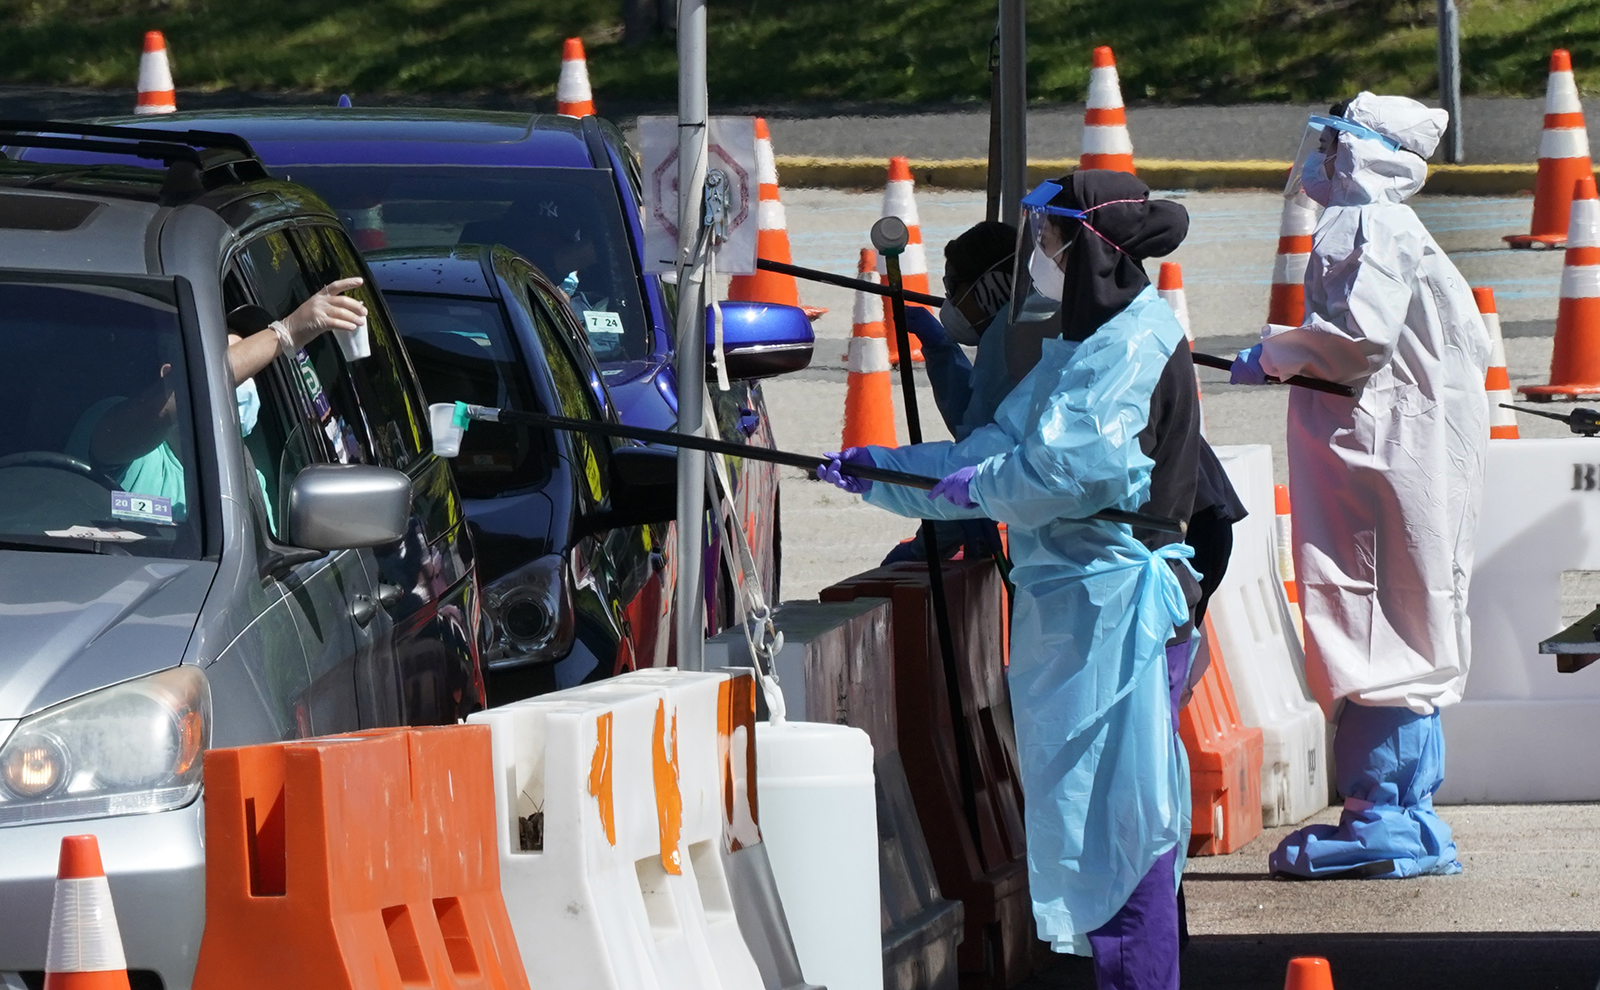 People line up in their cars at a drive-thru COVID-19 testing site at the Bergen Community College main campus, in Paramus, New Jersey, on Tuesday, May 12.